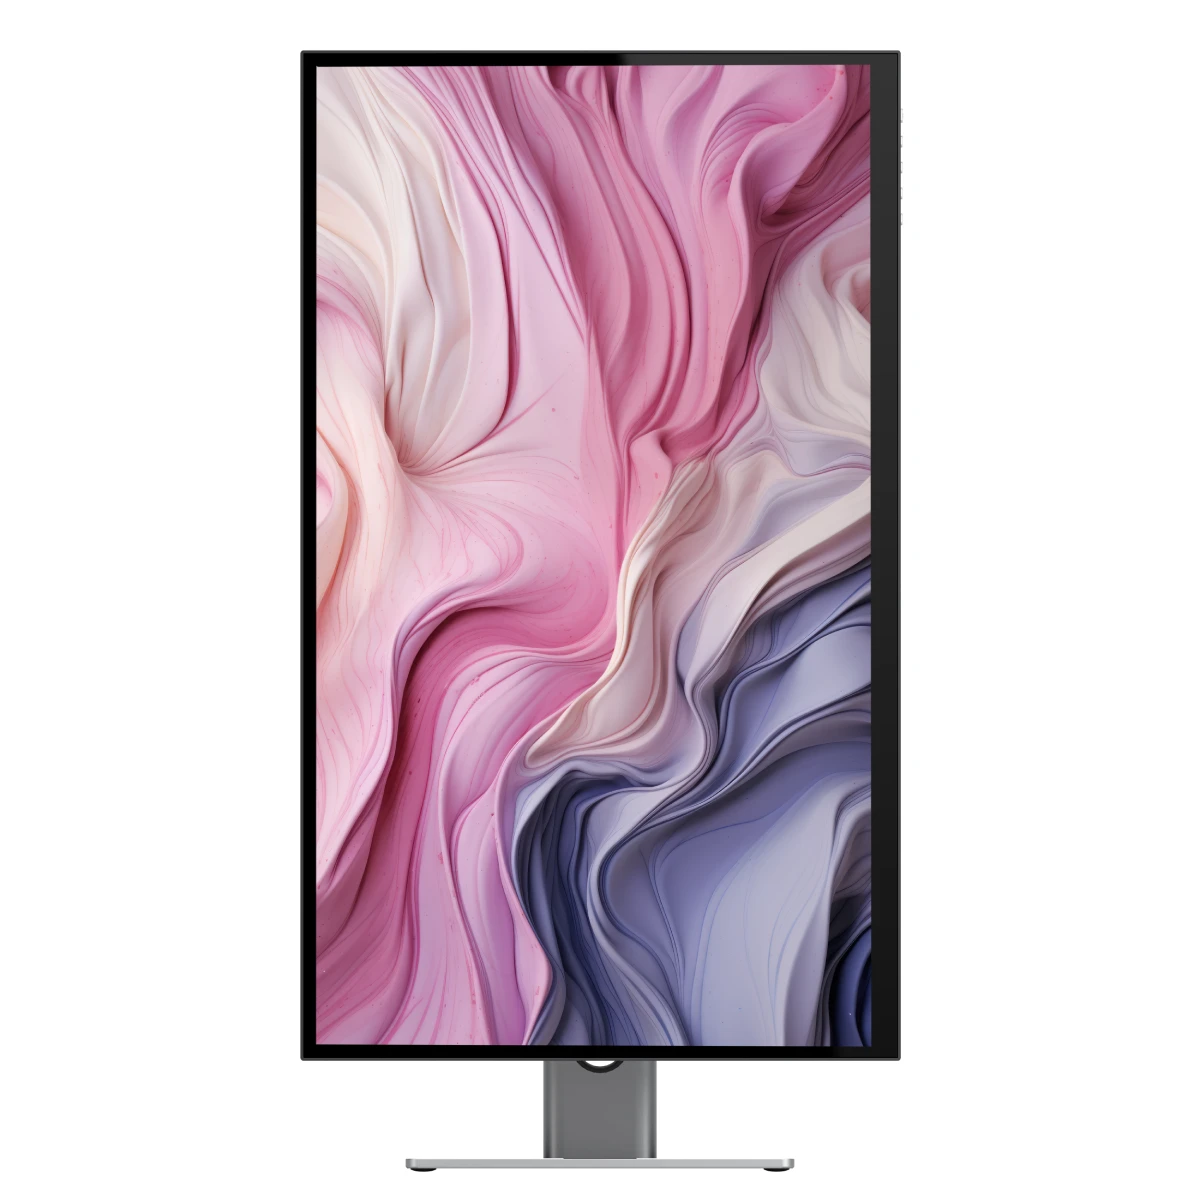 clarity-27-uhd-4k-monitor-pack-of-2_3